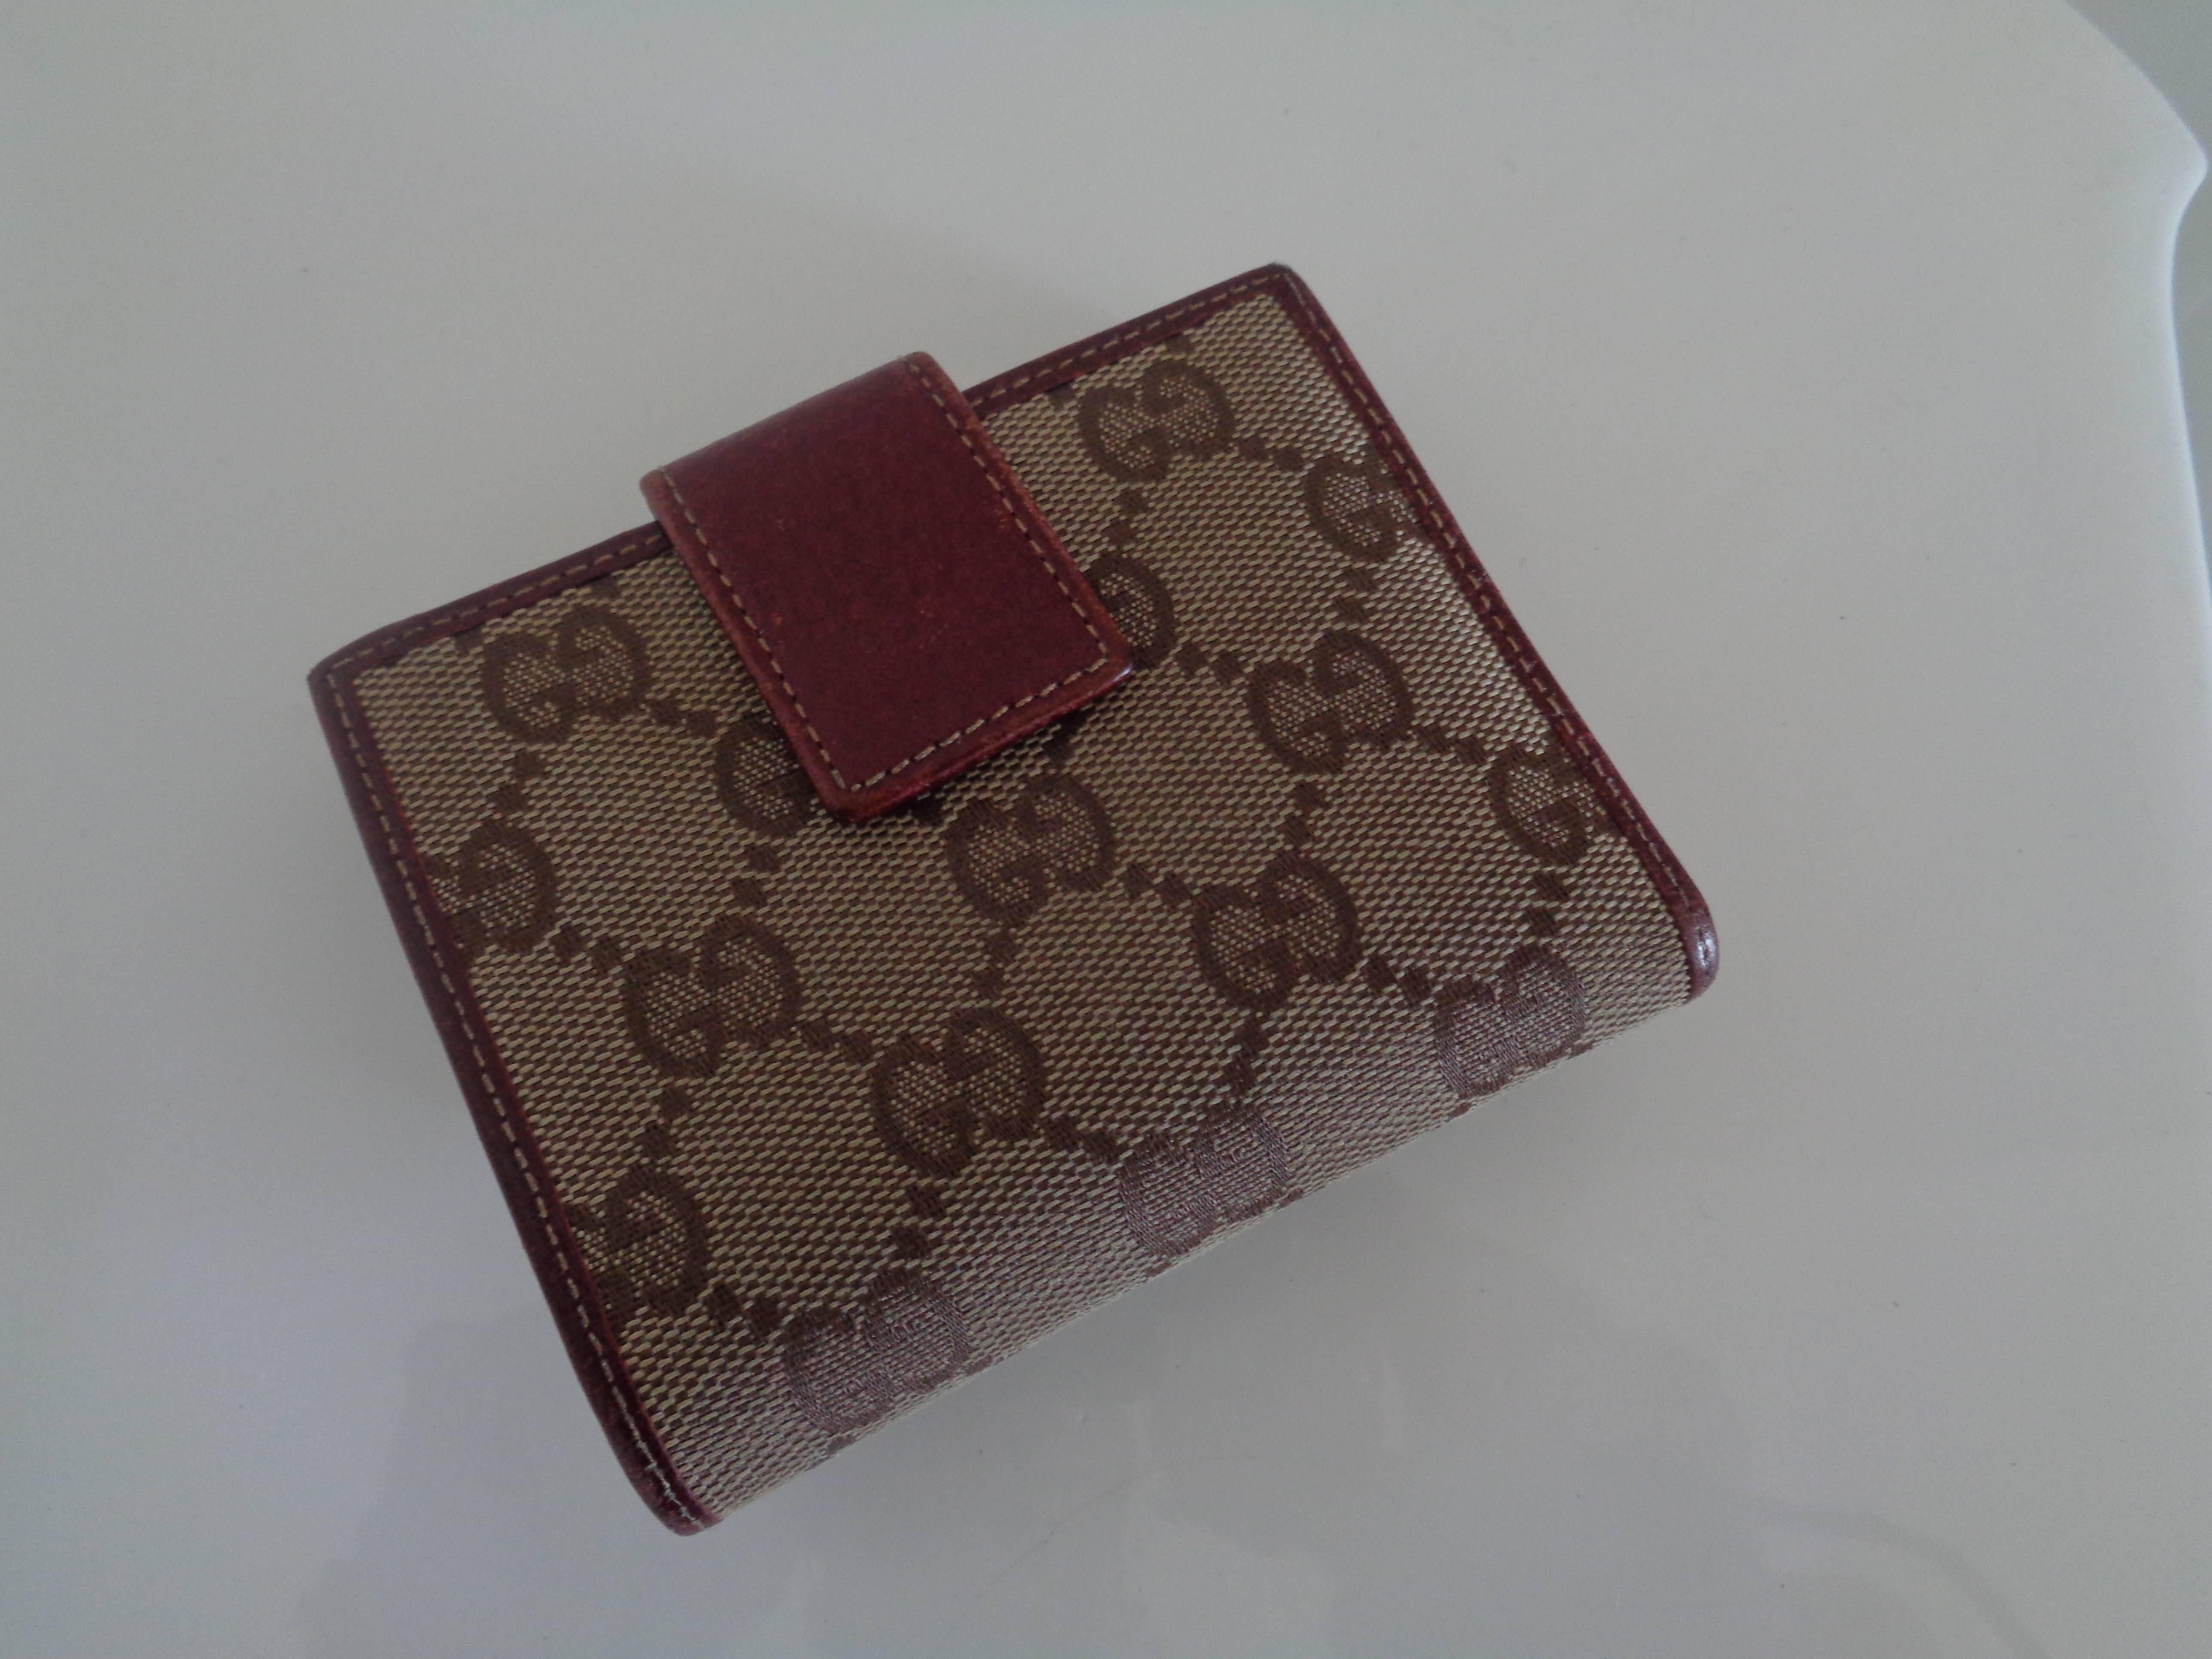 Gucci monogram Canvas Bordeaux Leather Wallet
Totally made in italy